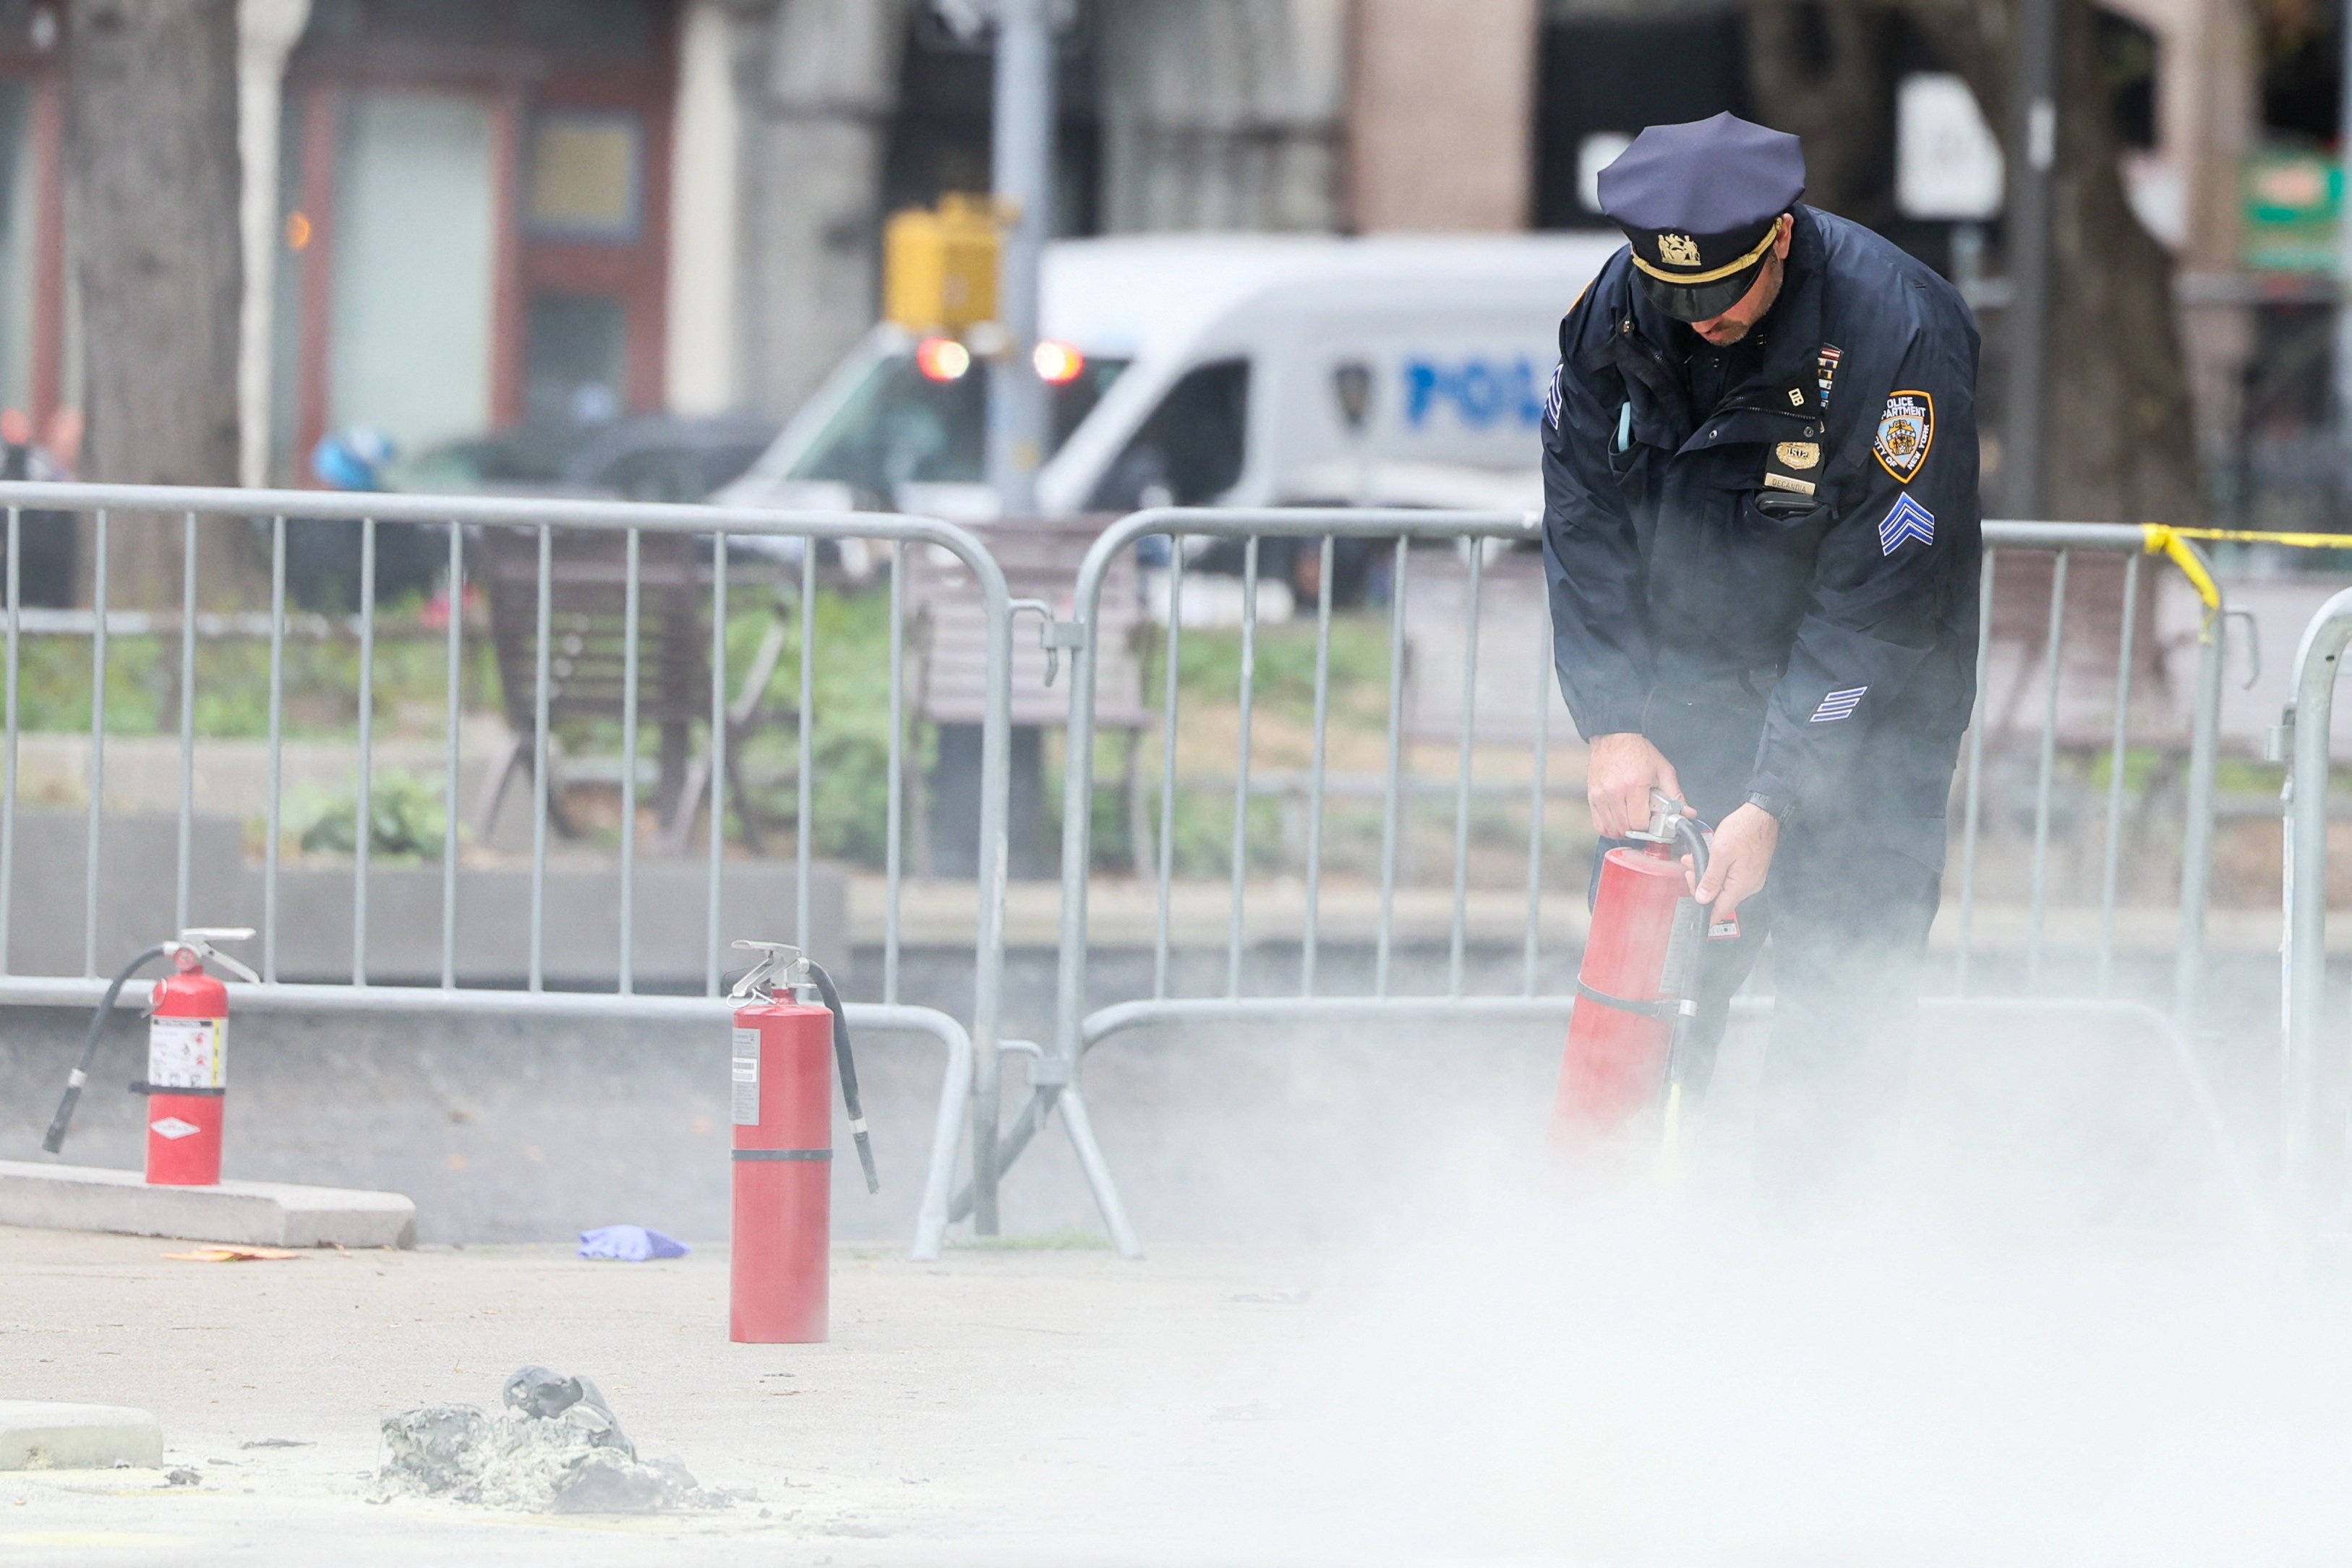 A police officer uses a fire extinguisher as emergency personnel respond to the scene where a person was covered in flames outside the New York courthouse where former US President Donald Trump’s criminal hush money trial is under way on Friday. Photo: Reuters